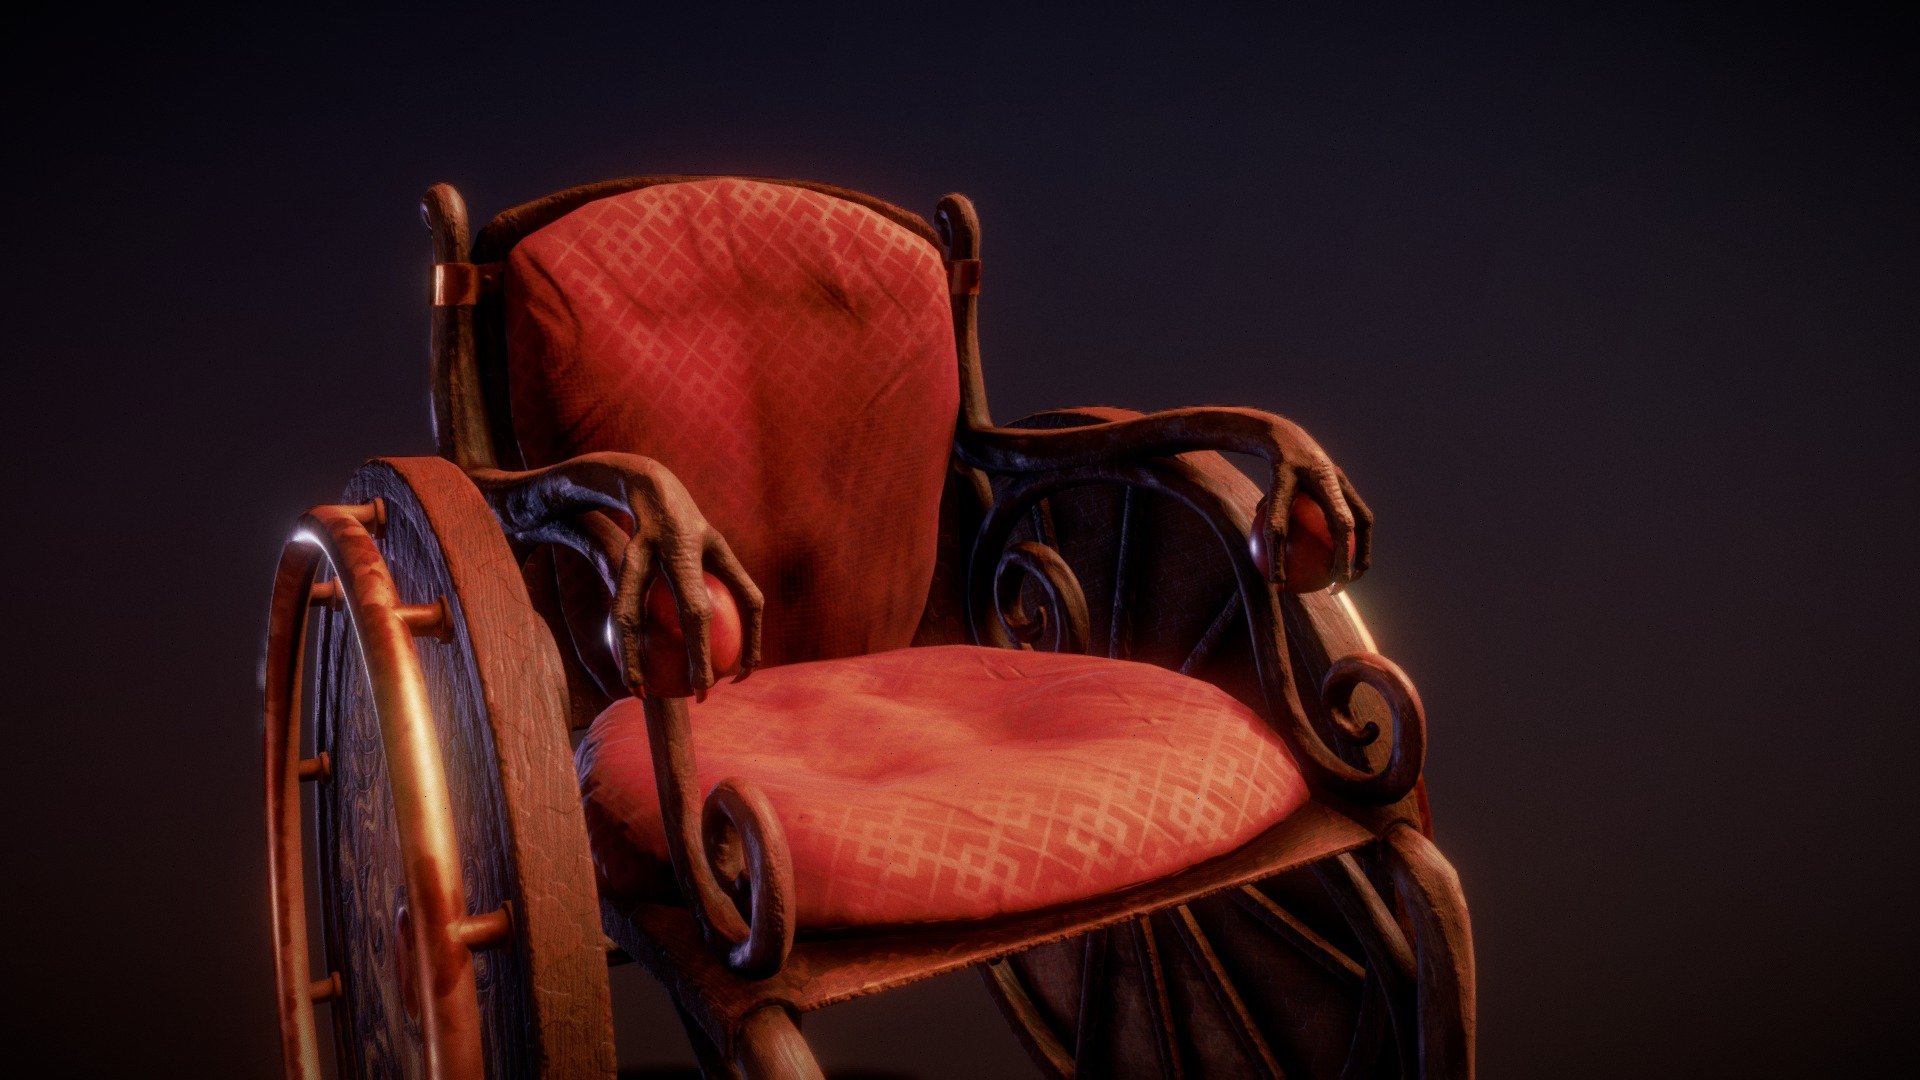 WheelChair for one of my characters in a medieval fantasy setting, designed myself.

Made with Maya and Substance Painter 3d model